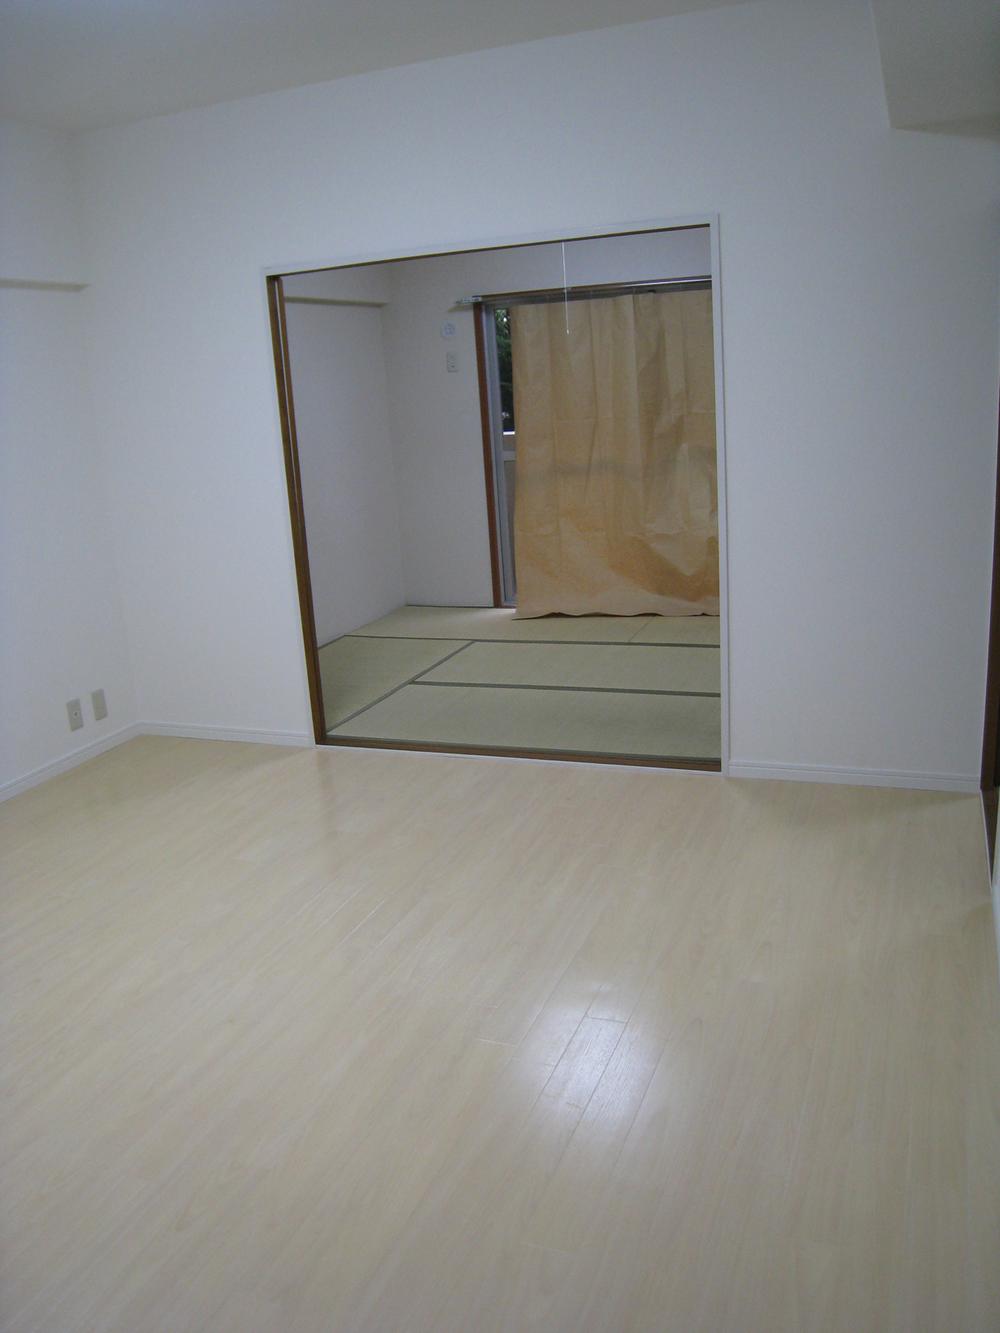 Other. Japanese-style room as seen from the living room ☆